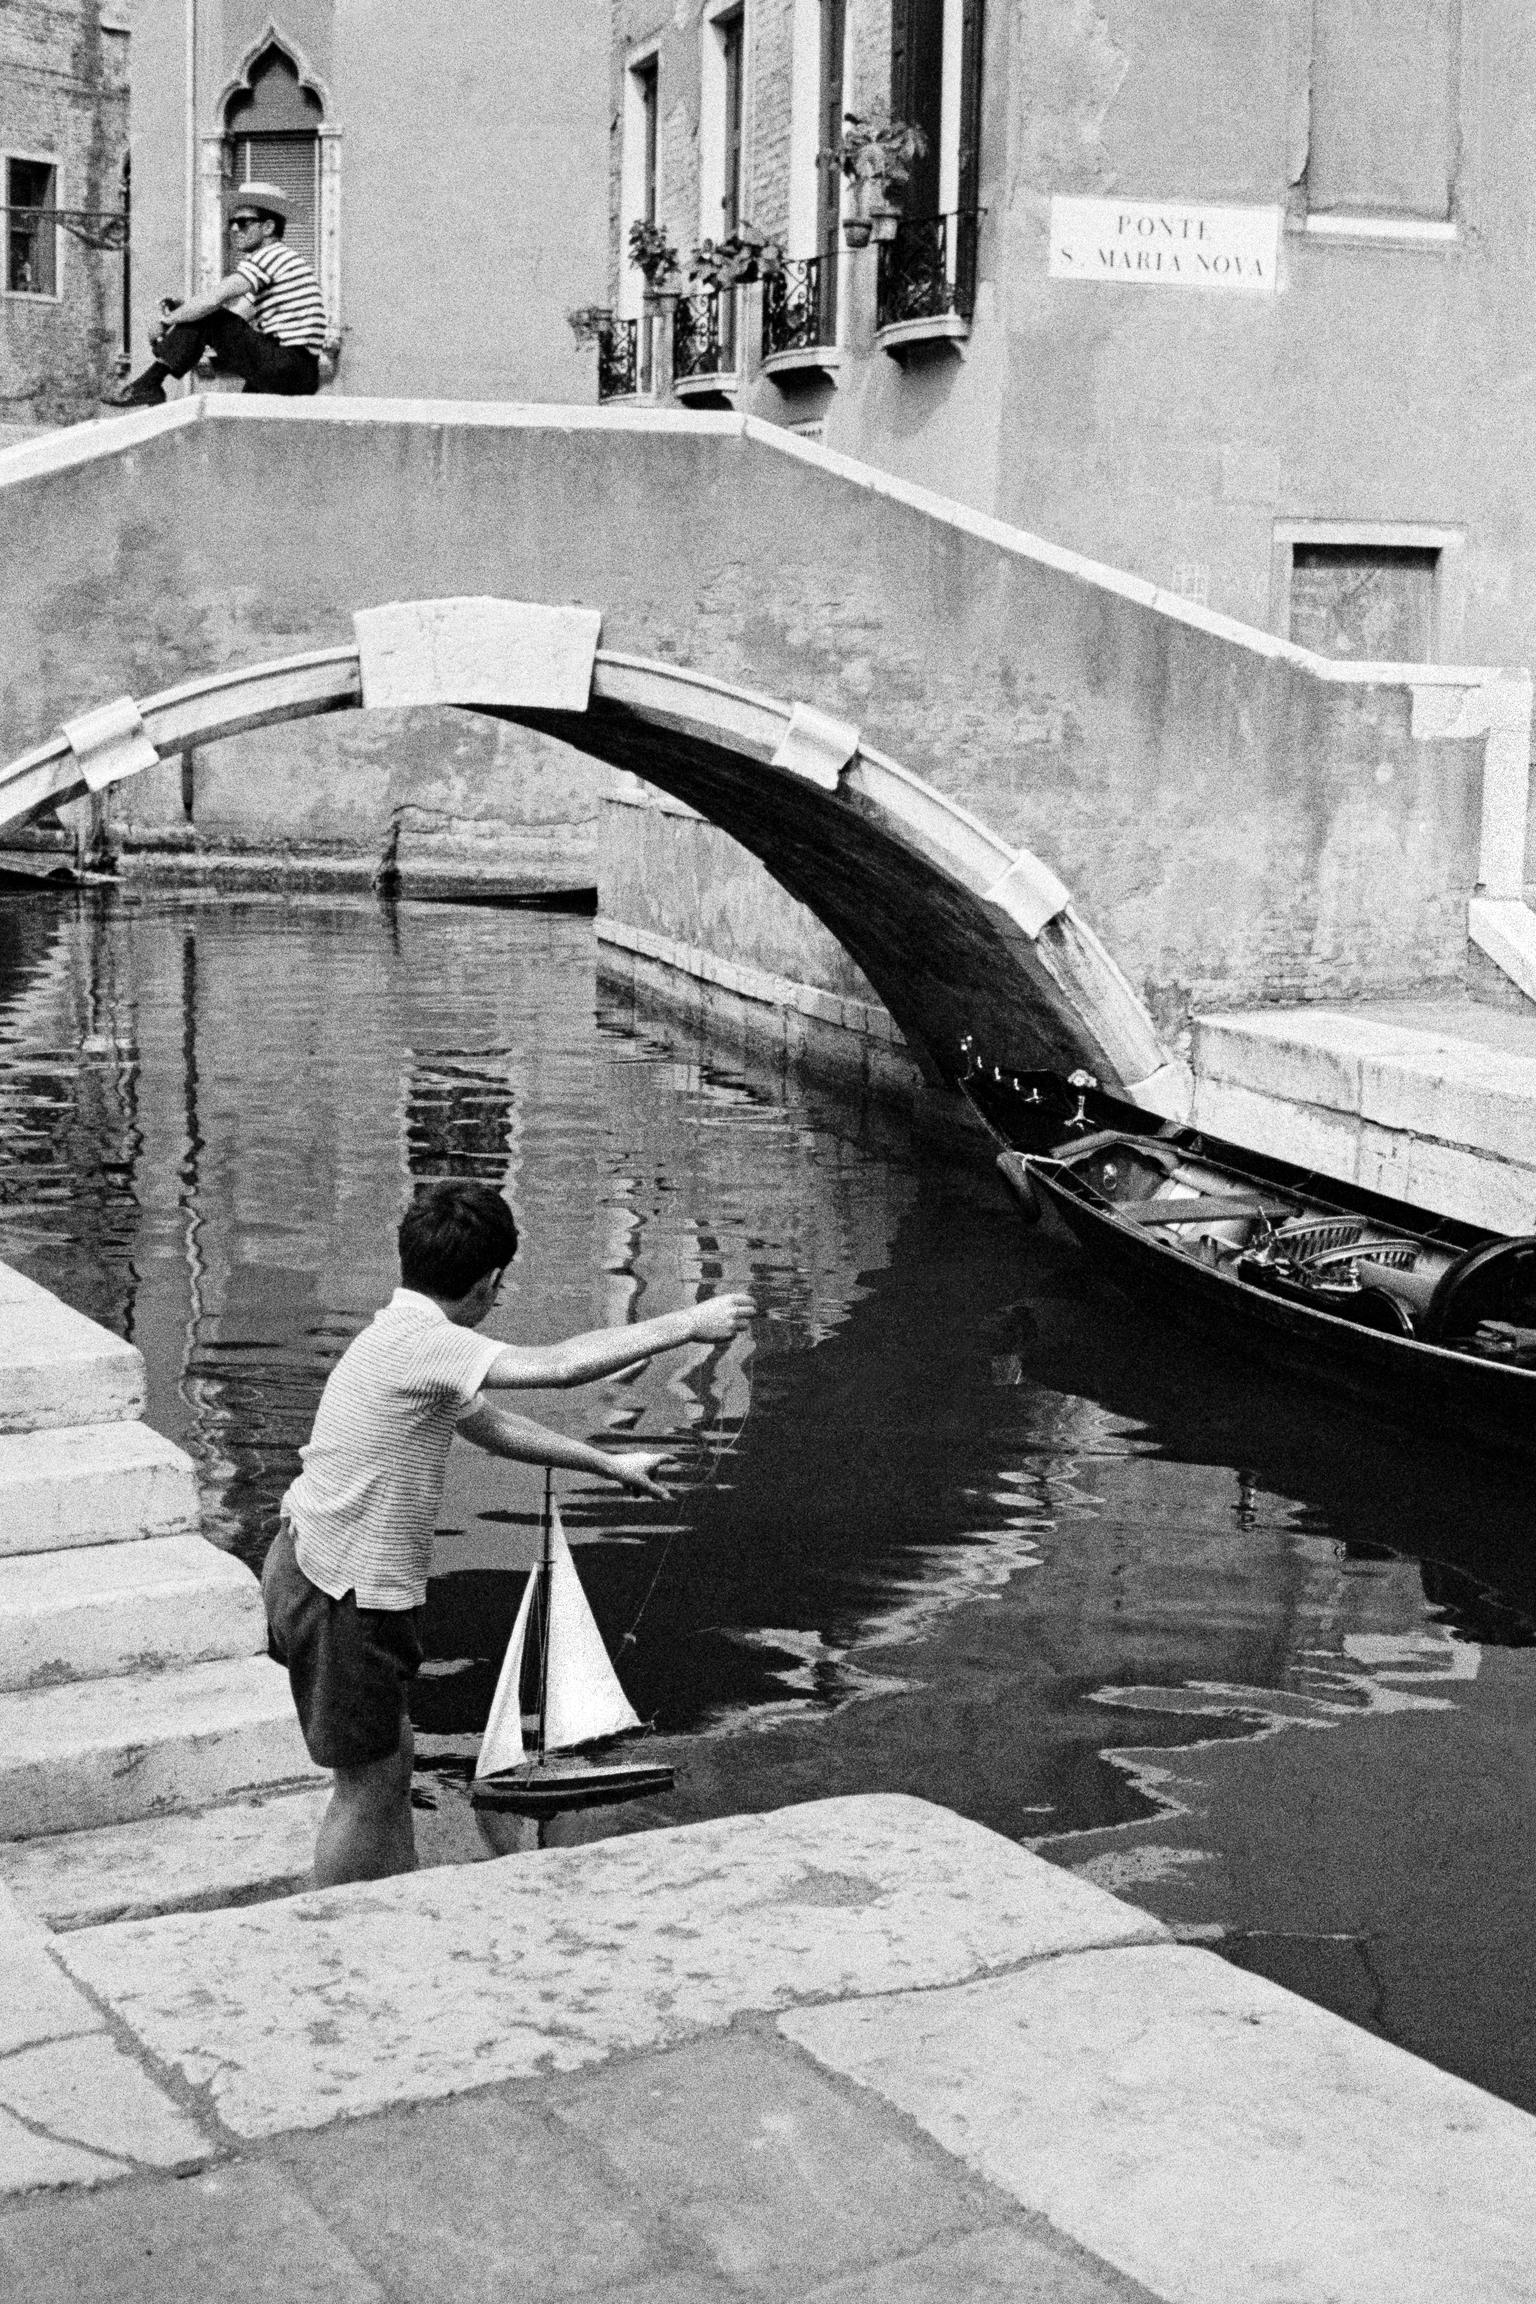 Child playing with his model yacht in one of the canals of Venice. Venice. Italy